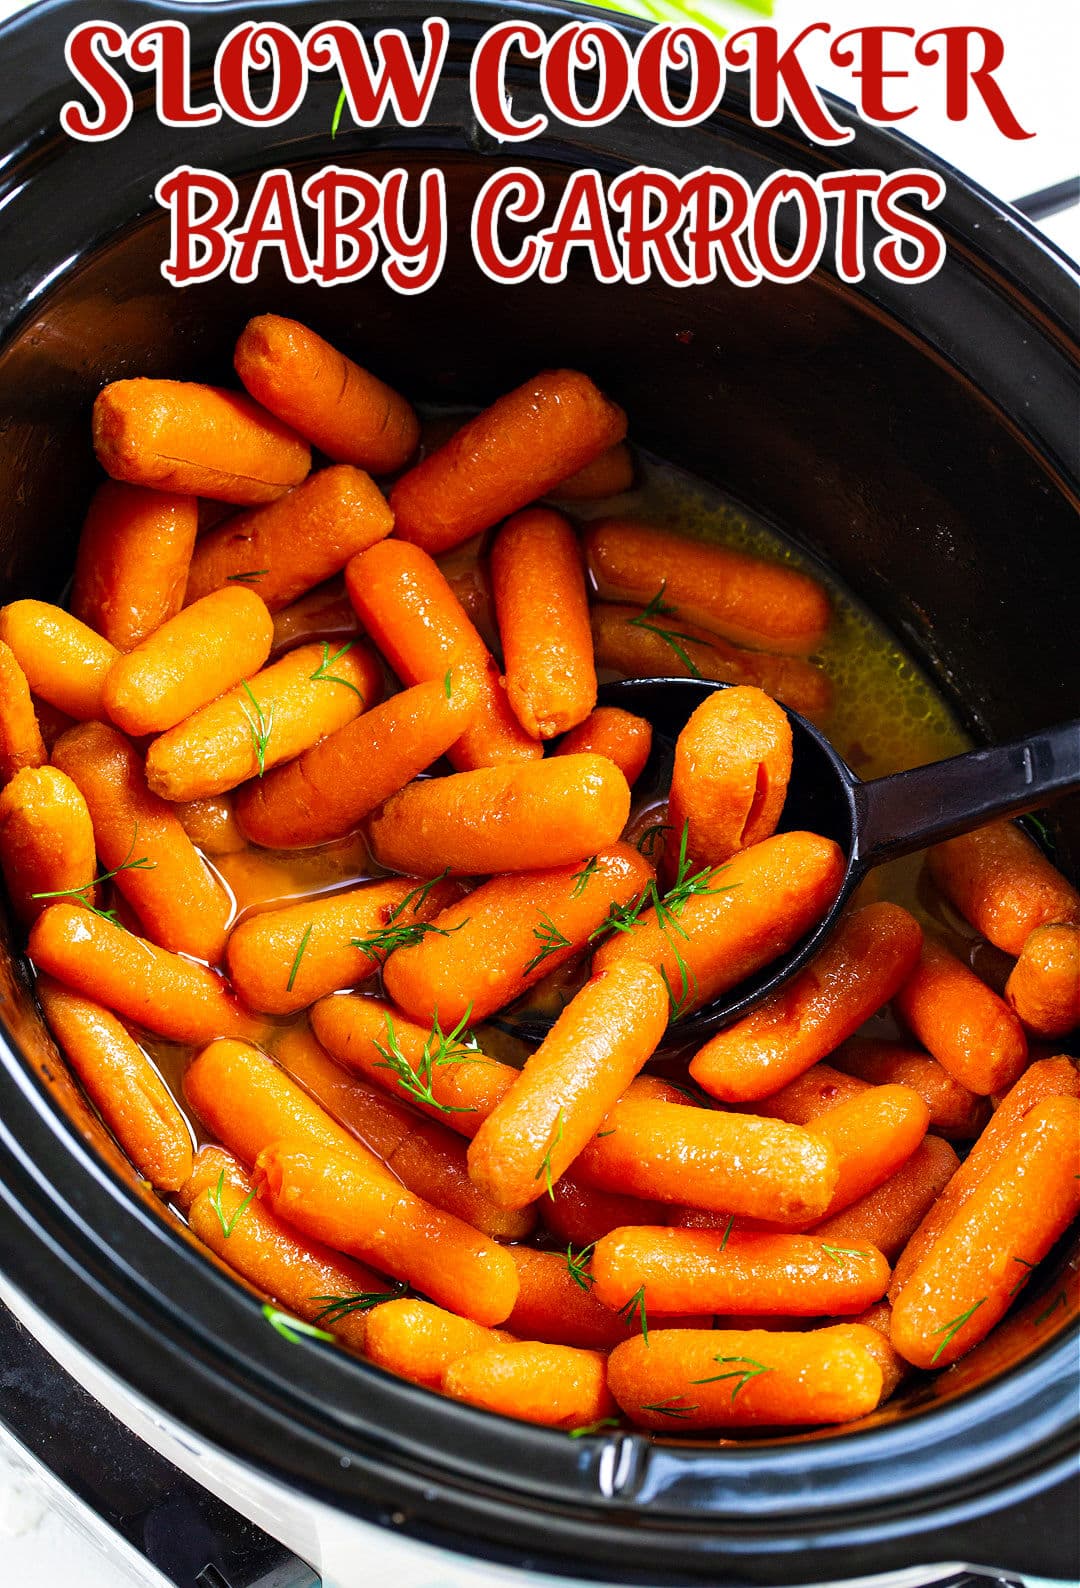 Spoon scooping carrots out of slow cooker.